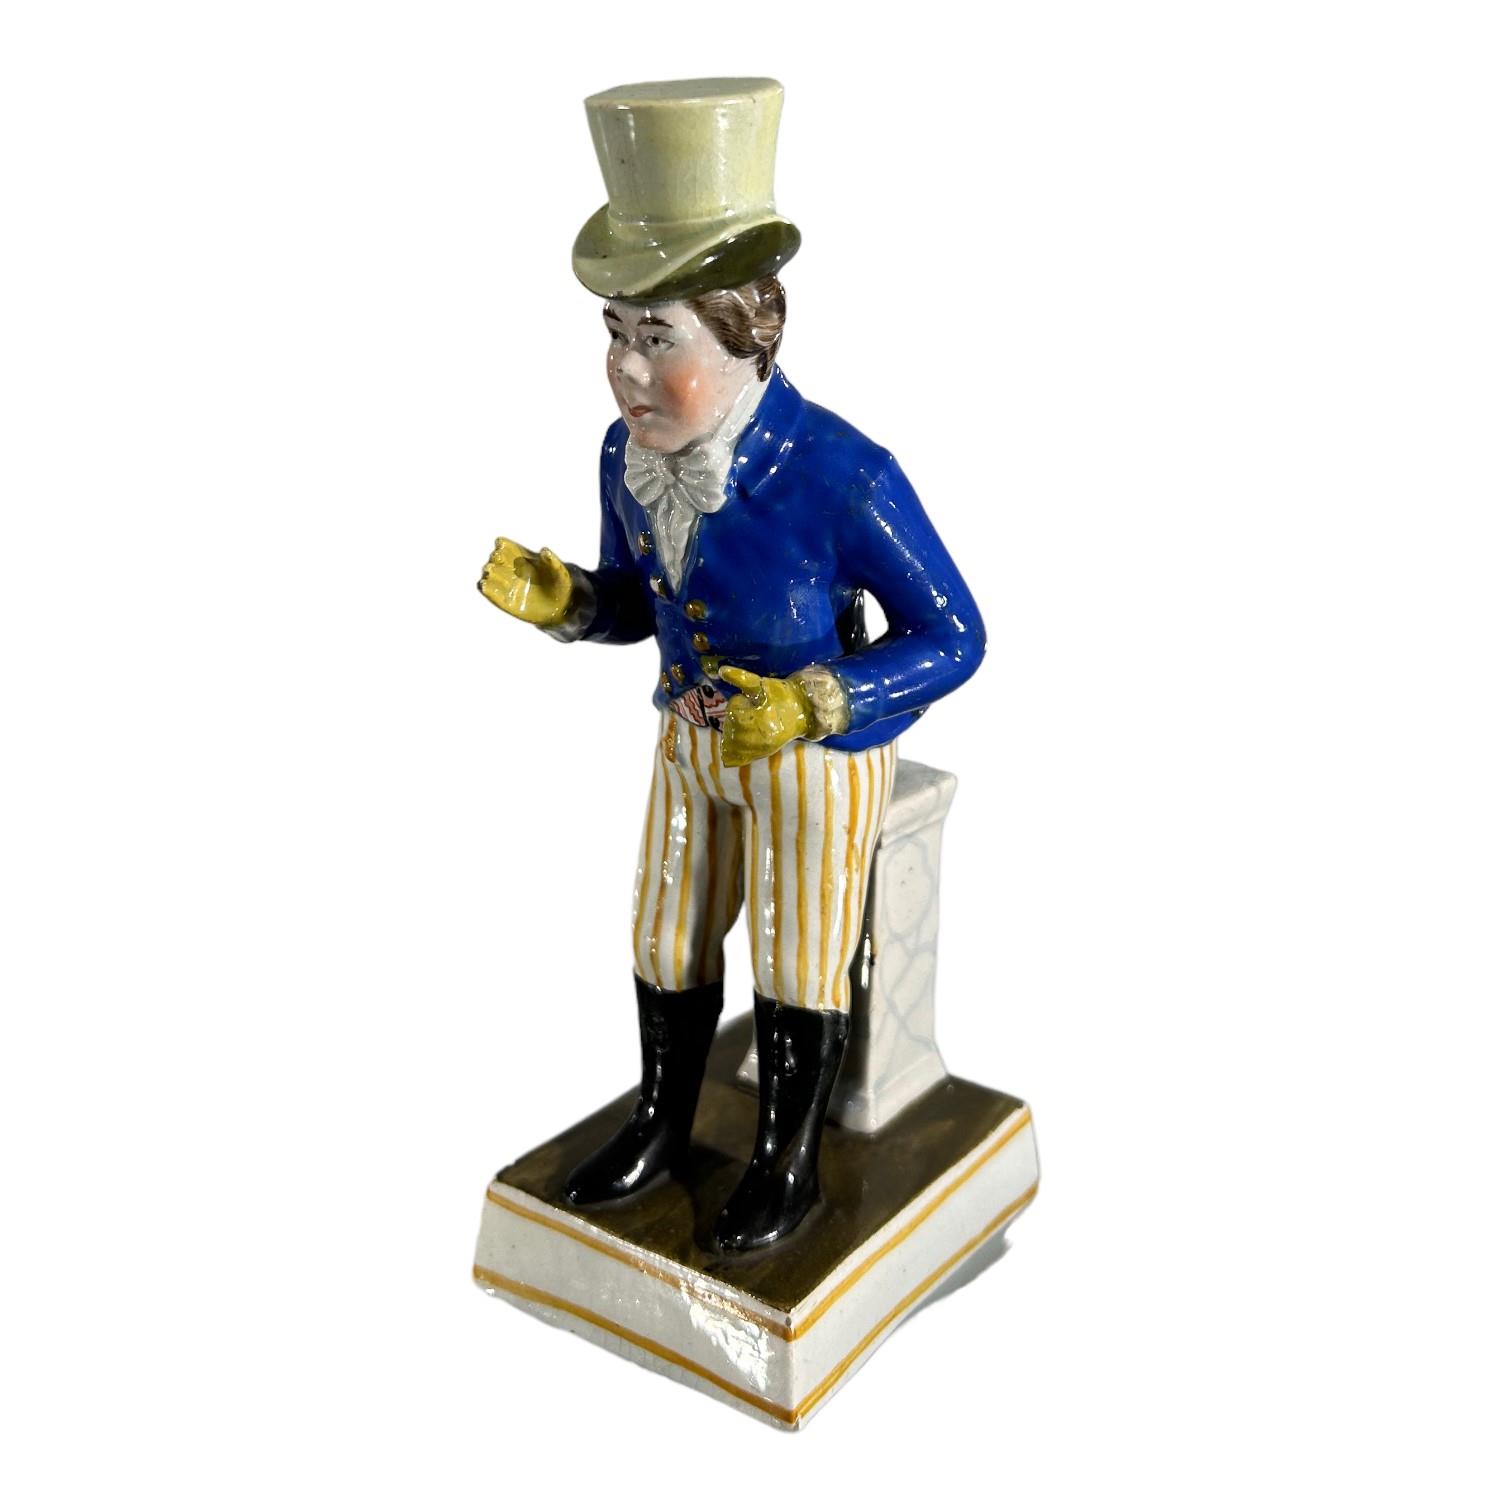 DERBY, A 19TH CENTURY PORCELAIN THEATRICAL FIGURE OF ‘MR LISTON’ AS ‘PAUL PRY’. (h 15.1cm x w 4.